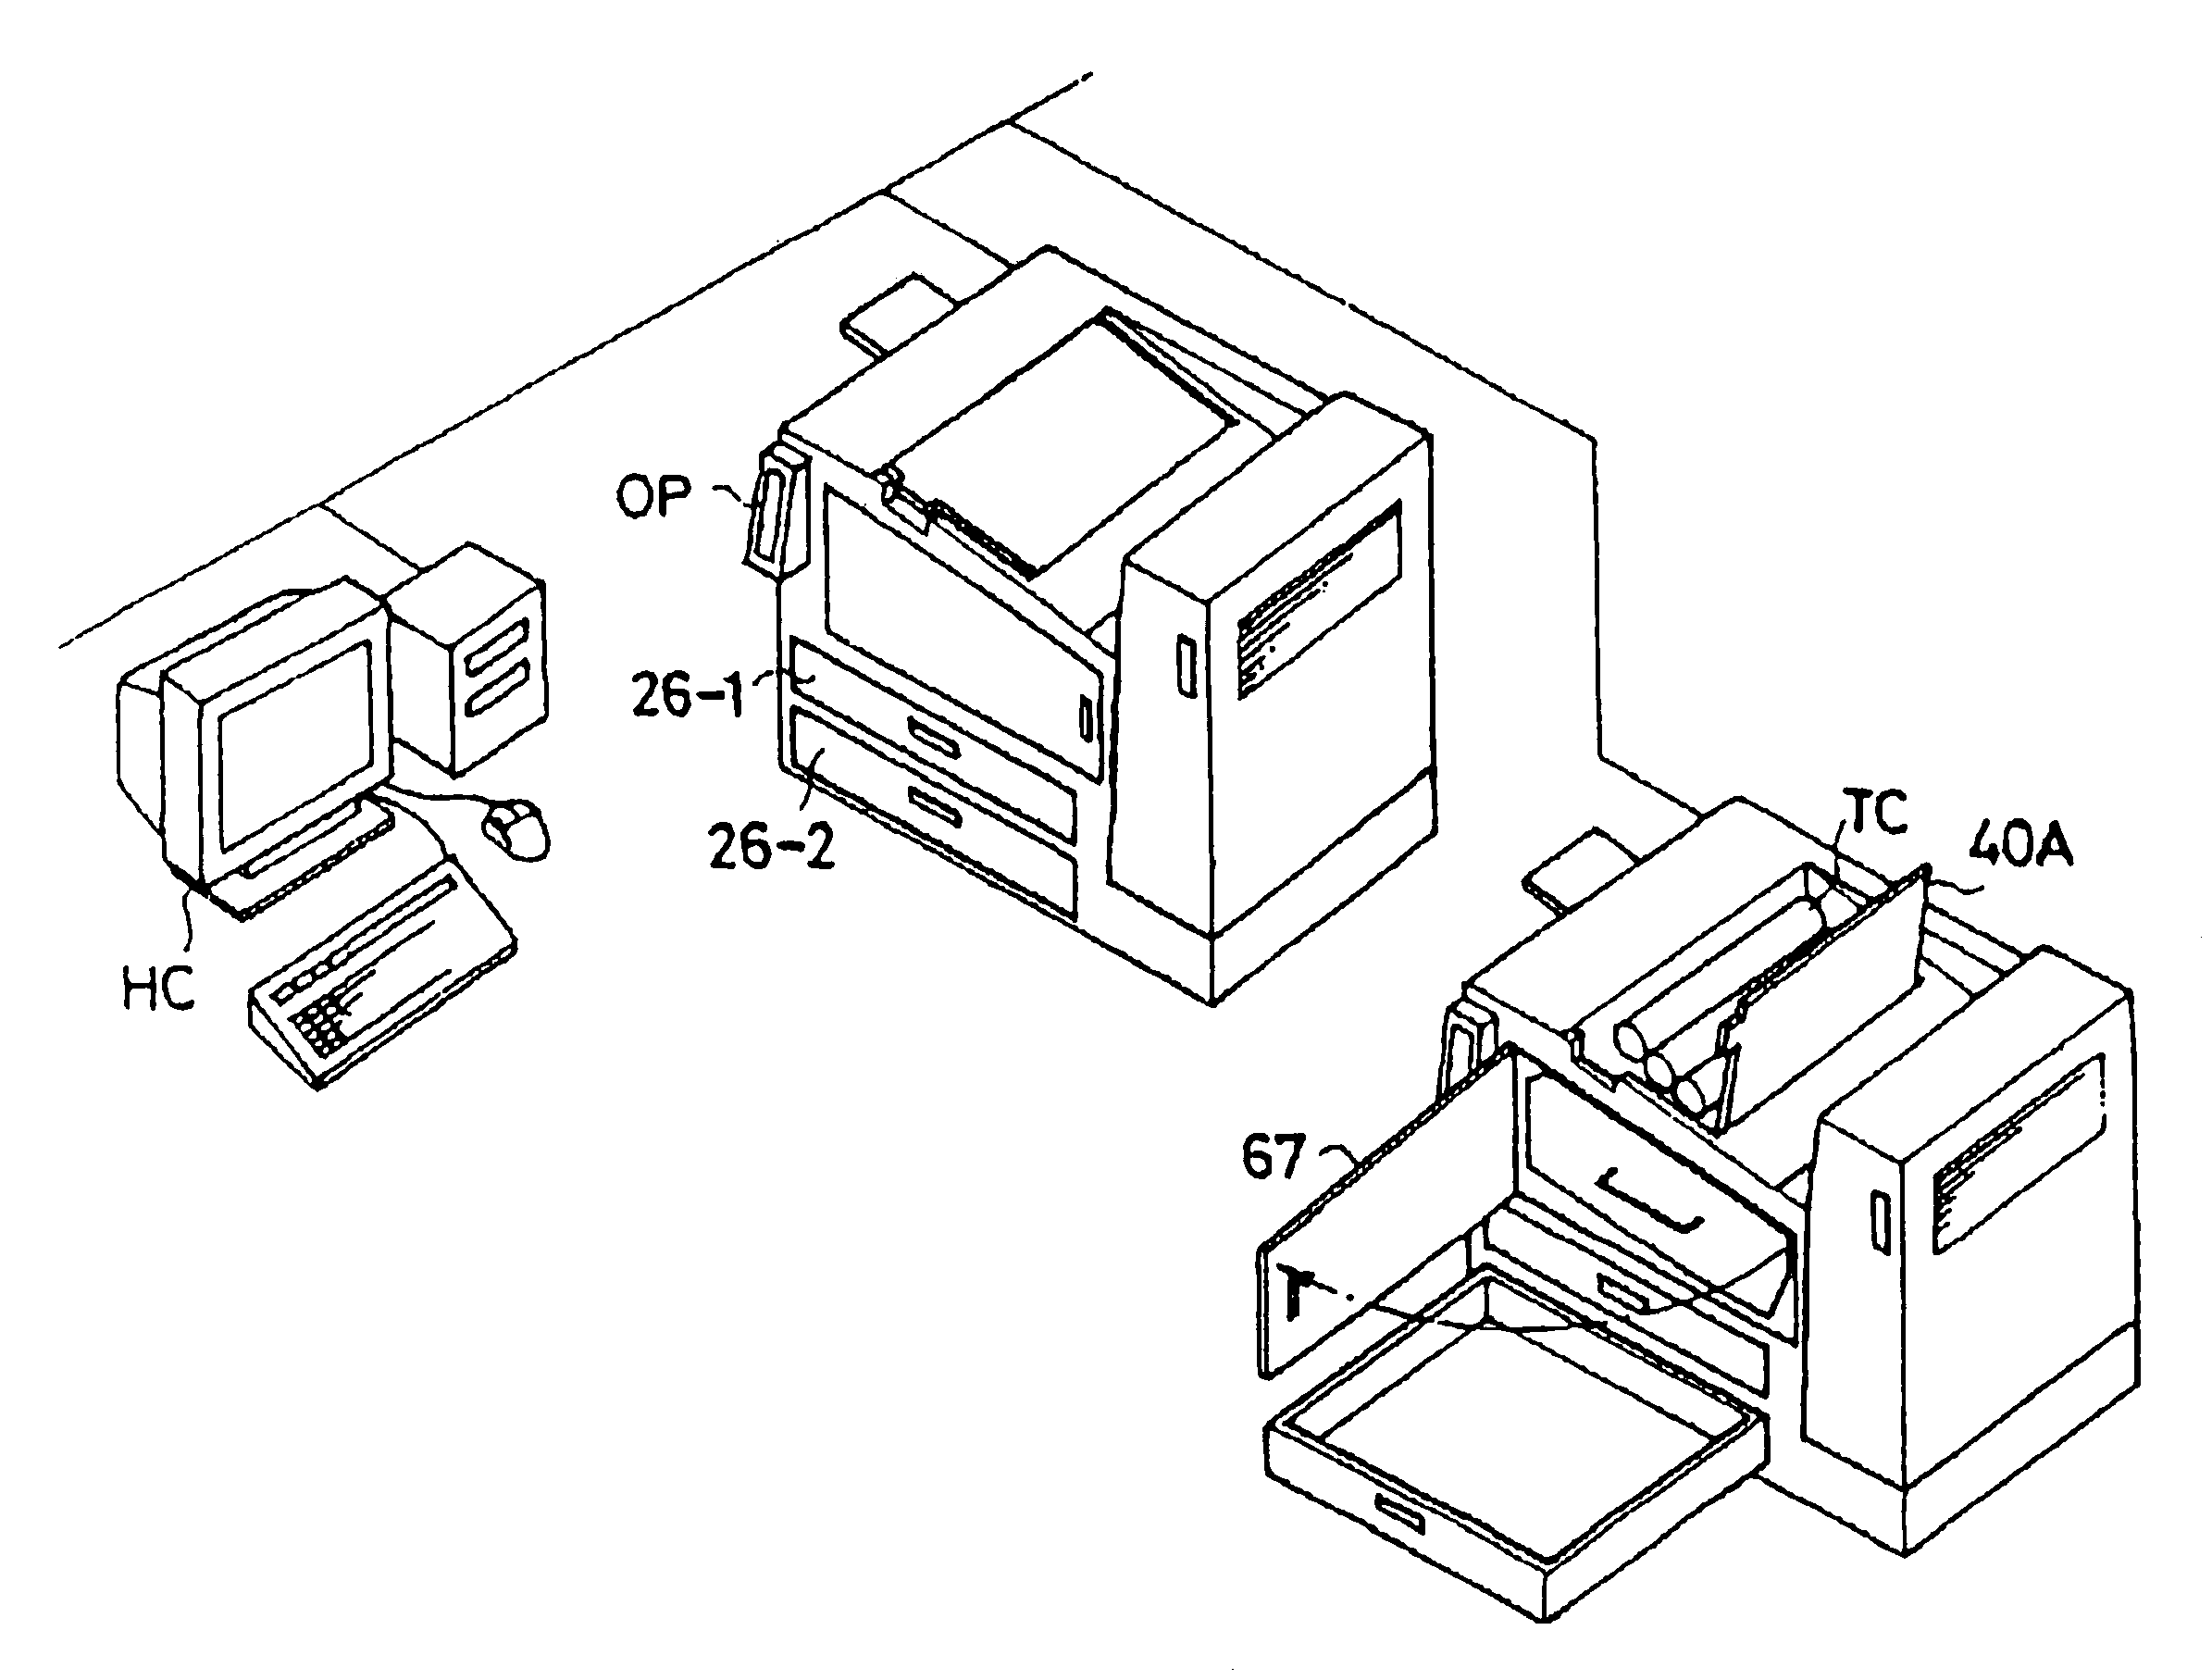 Image forming apparatus operable in a duplex print mode